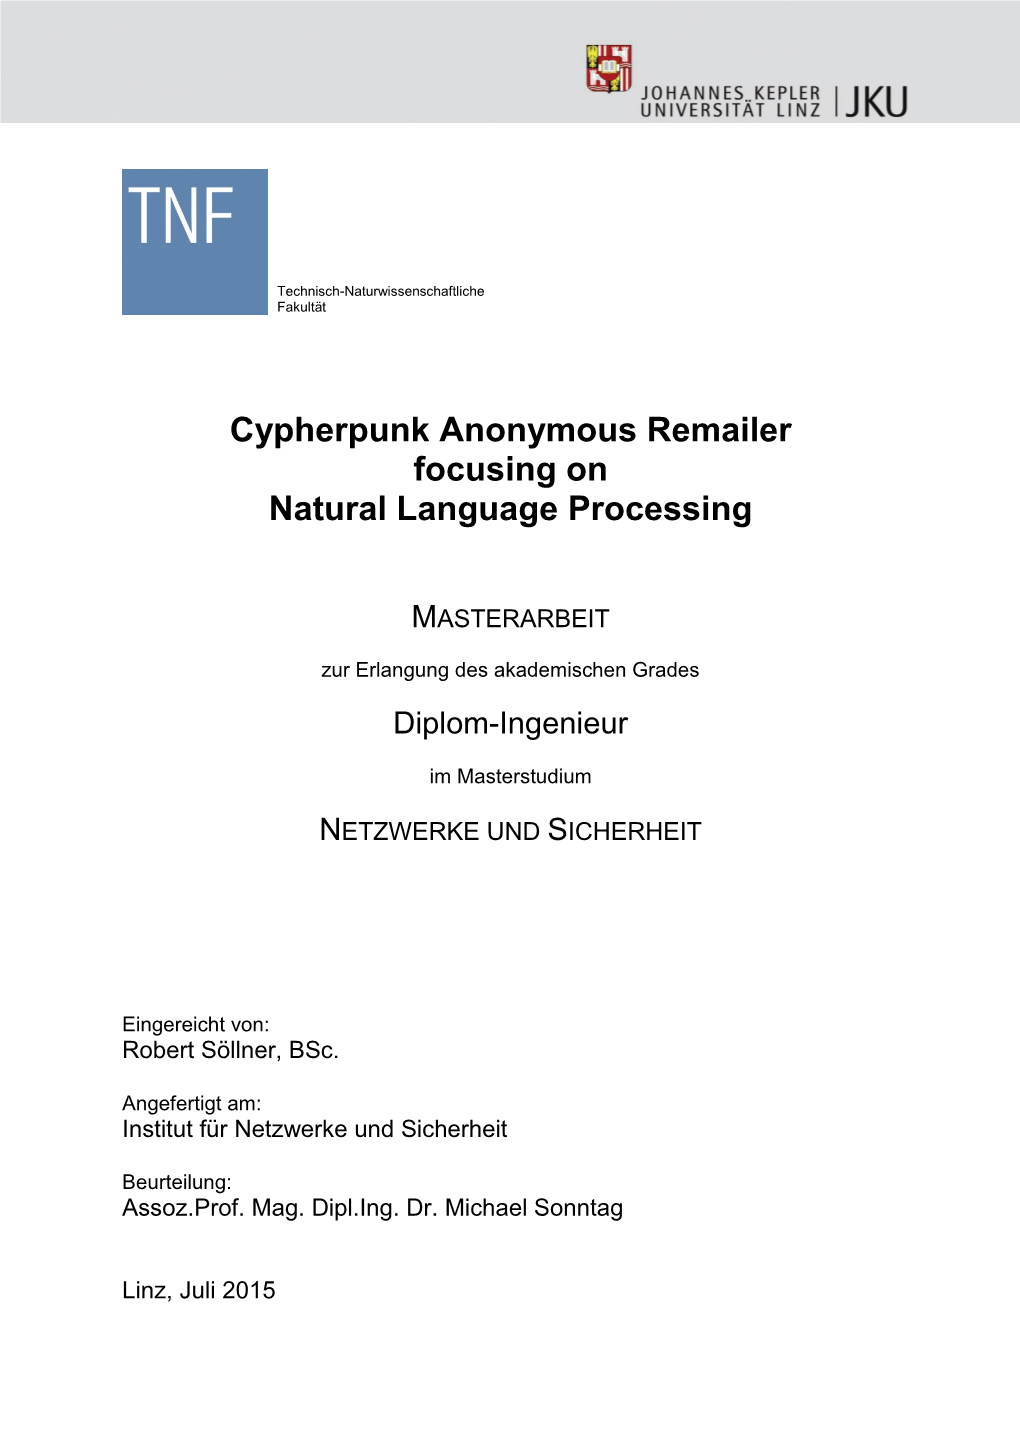 Cypherpunk Anonymous Remailer Focusing on Natural Language Processing